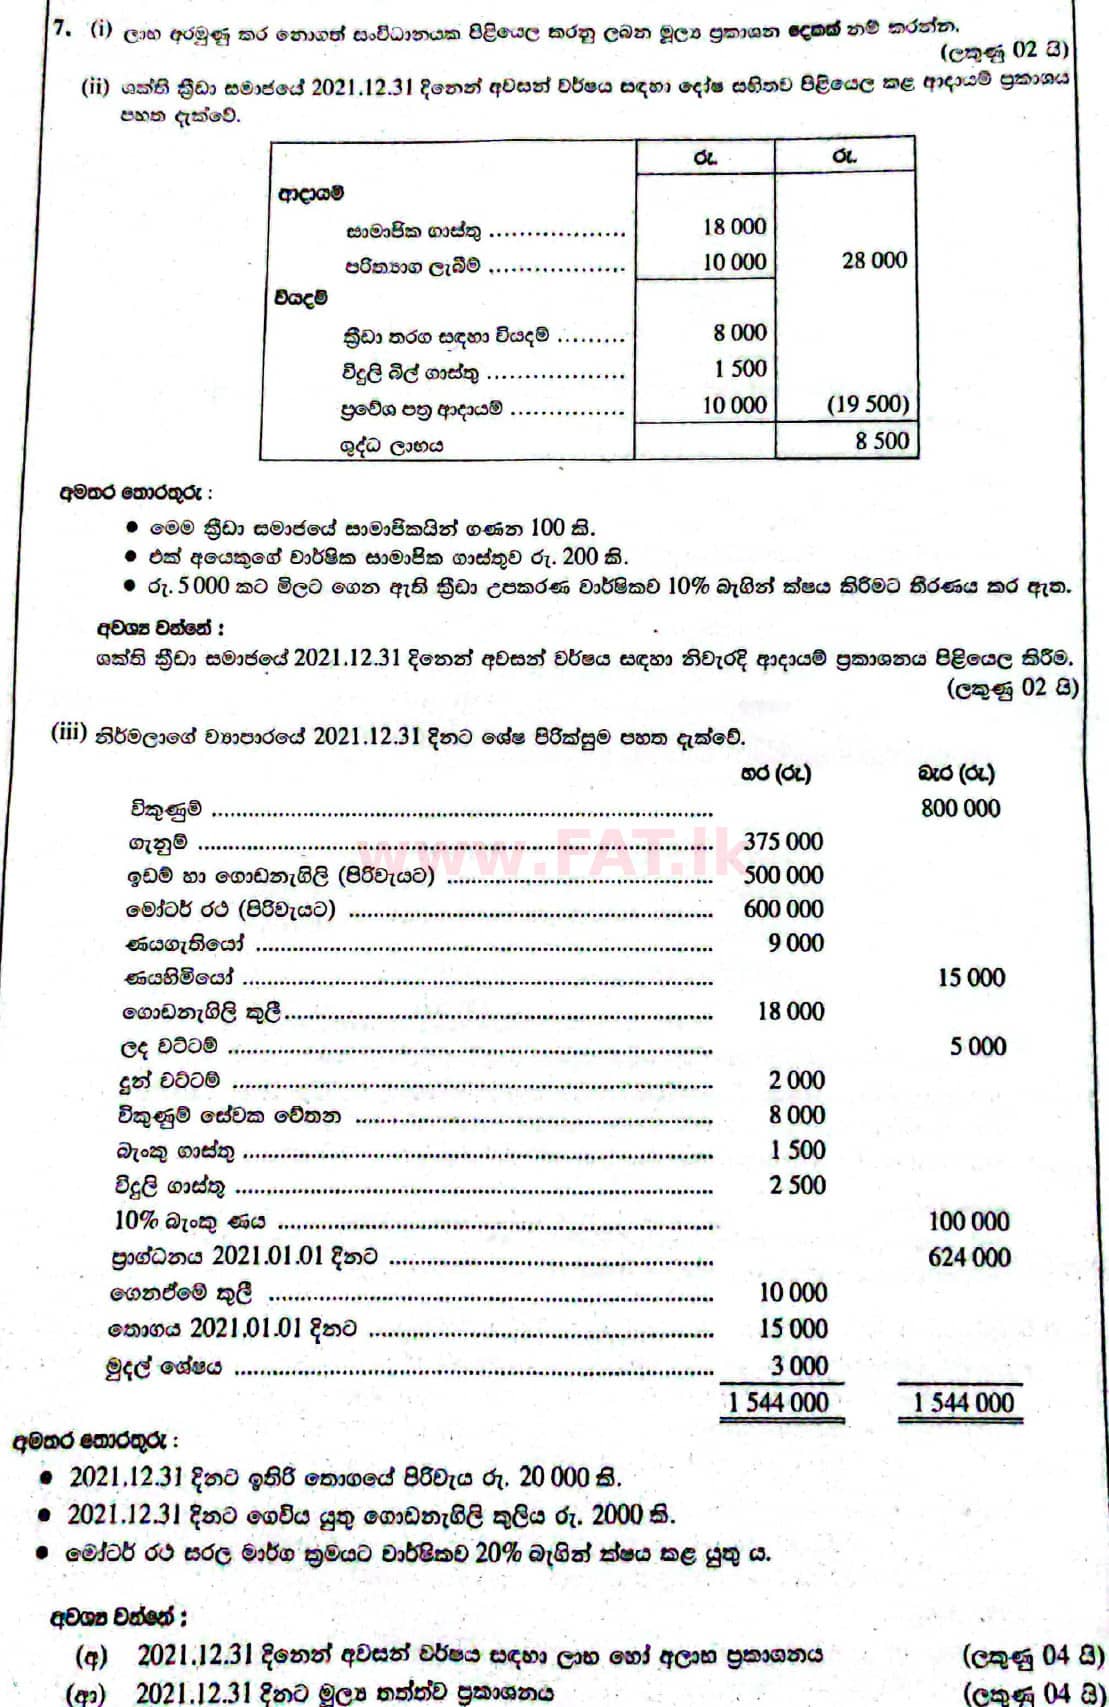 National Syllabus : Ordinary Level (O/L) Business and Accounting Studies - 2021 May - Paper II (සිංහල Medium) 7 1